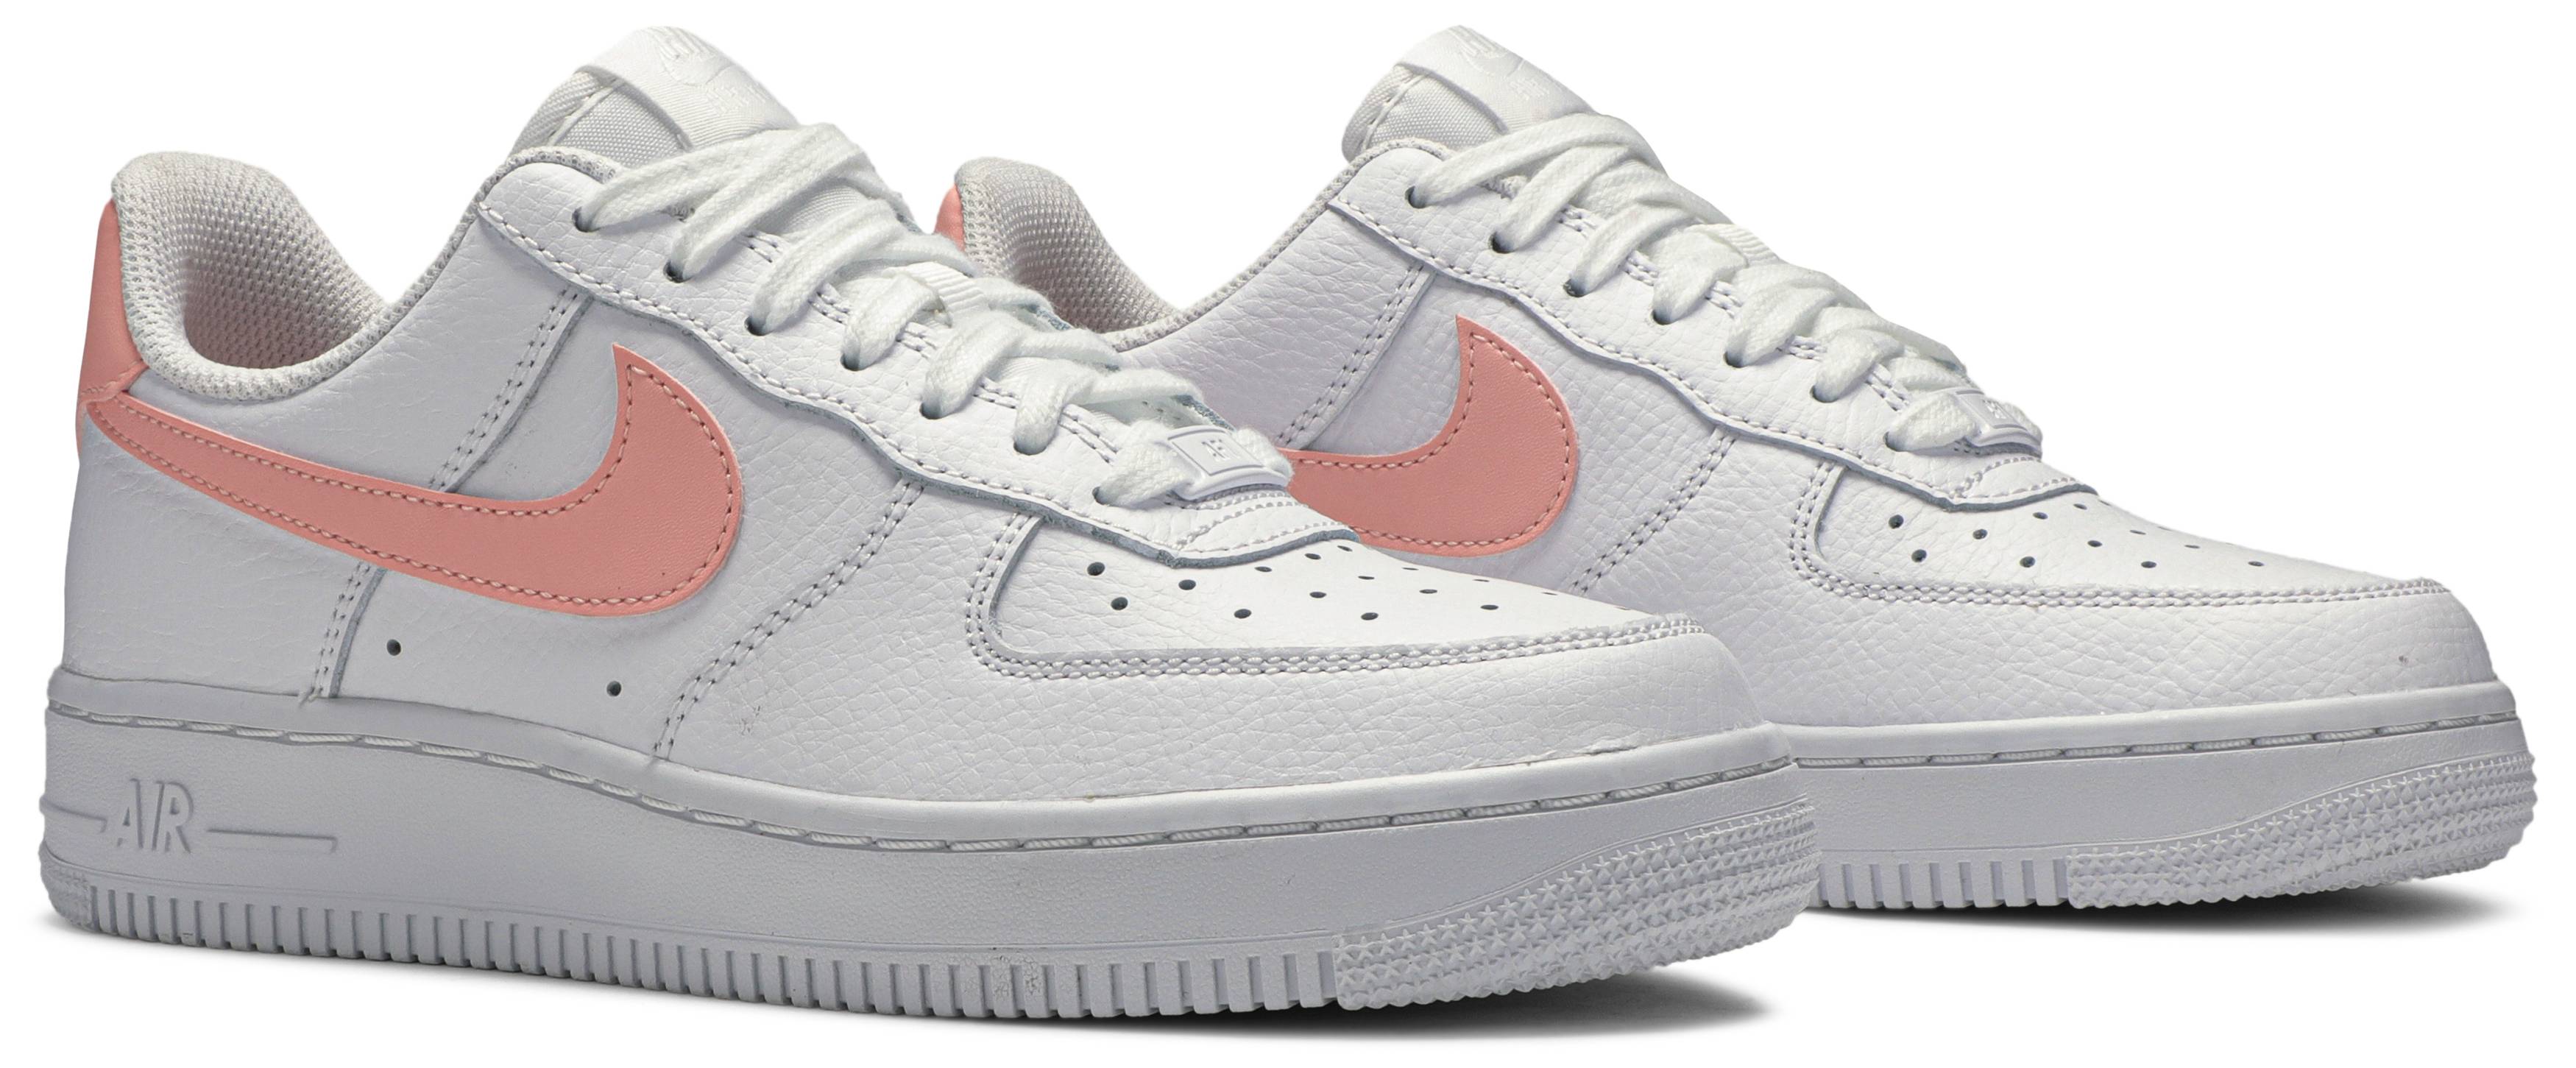 Wmns Air Force 1 '07 'Oracle Pink' - Nike - AH0287 102 | GOAT